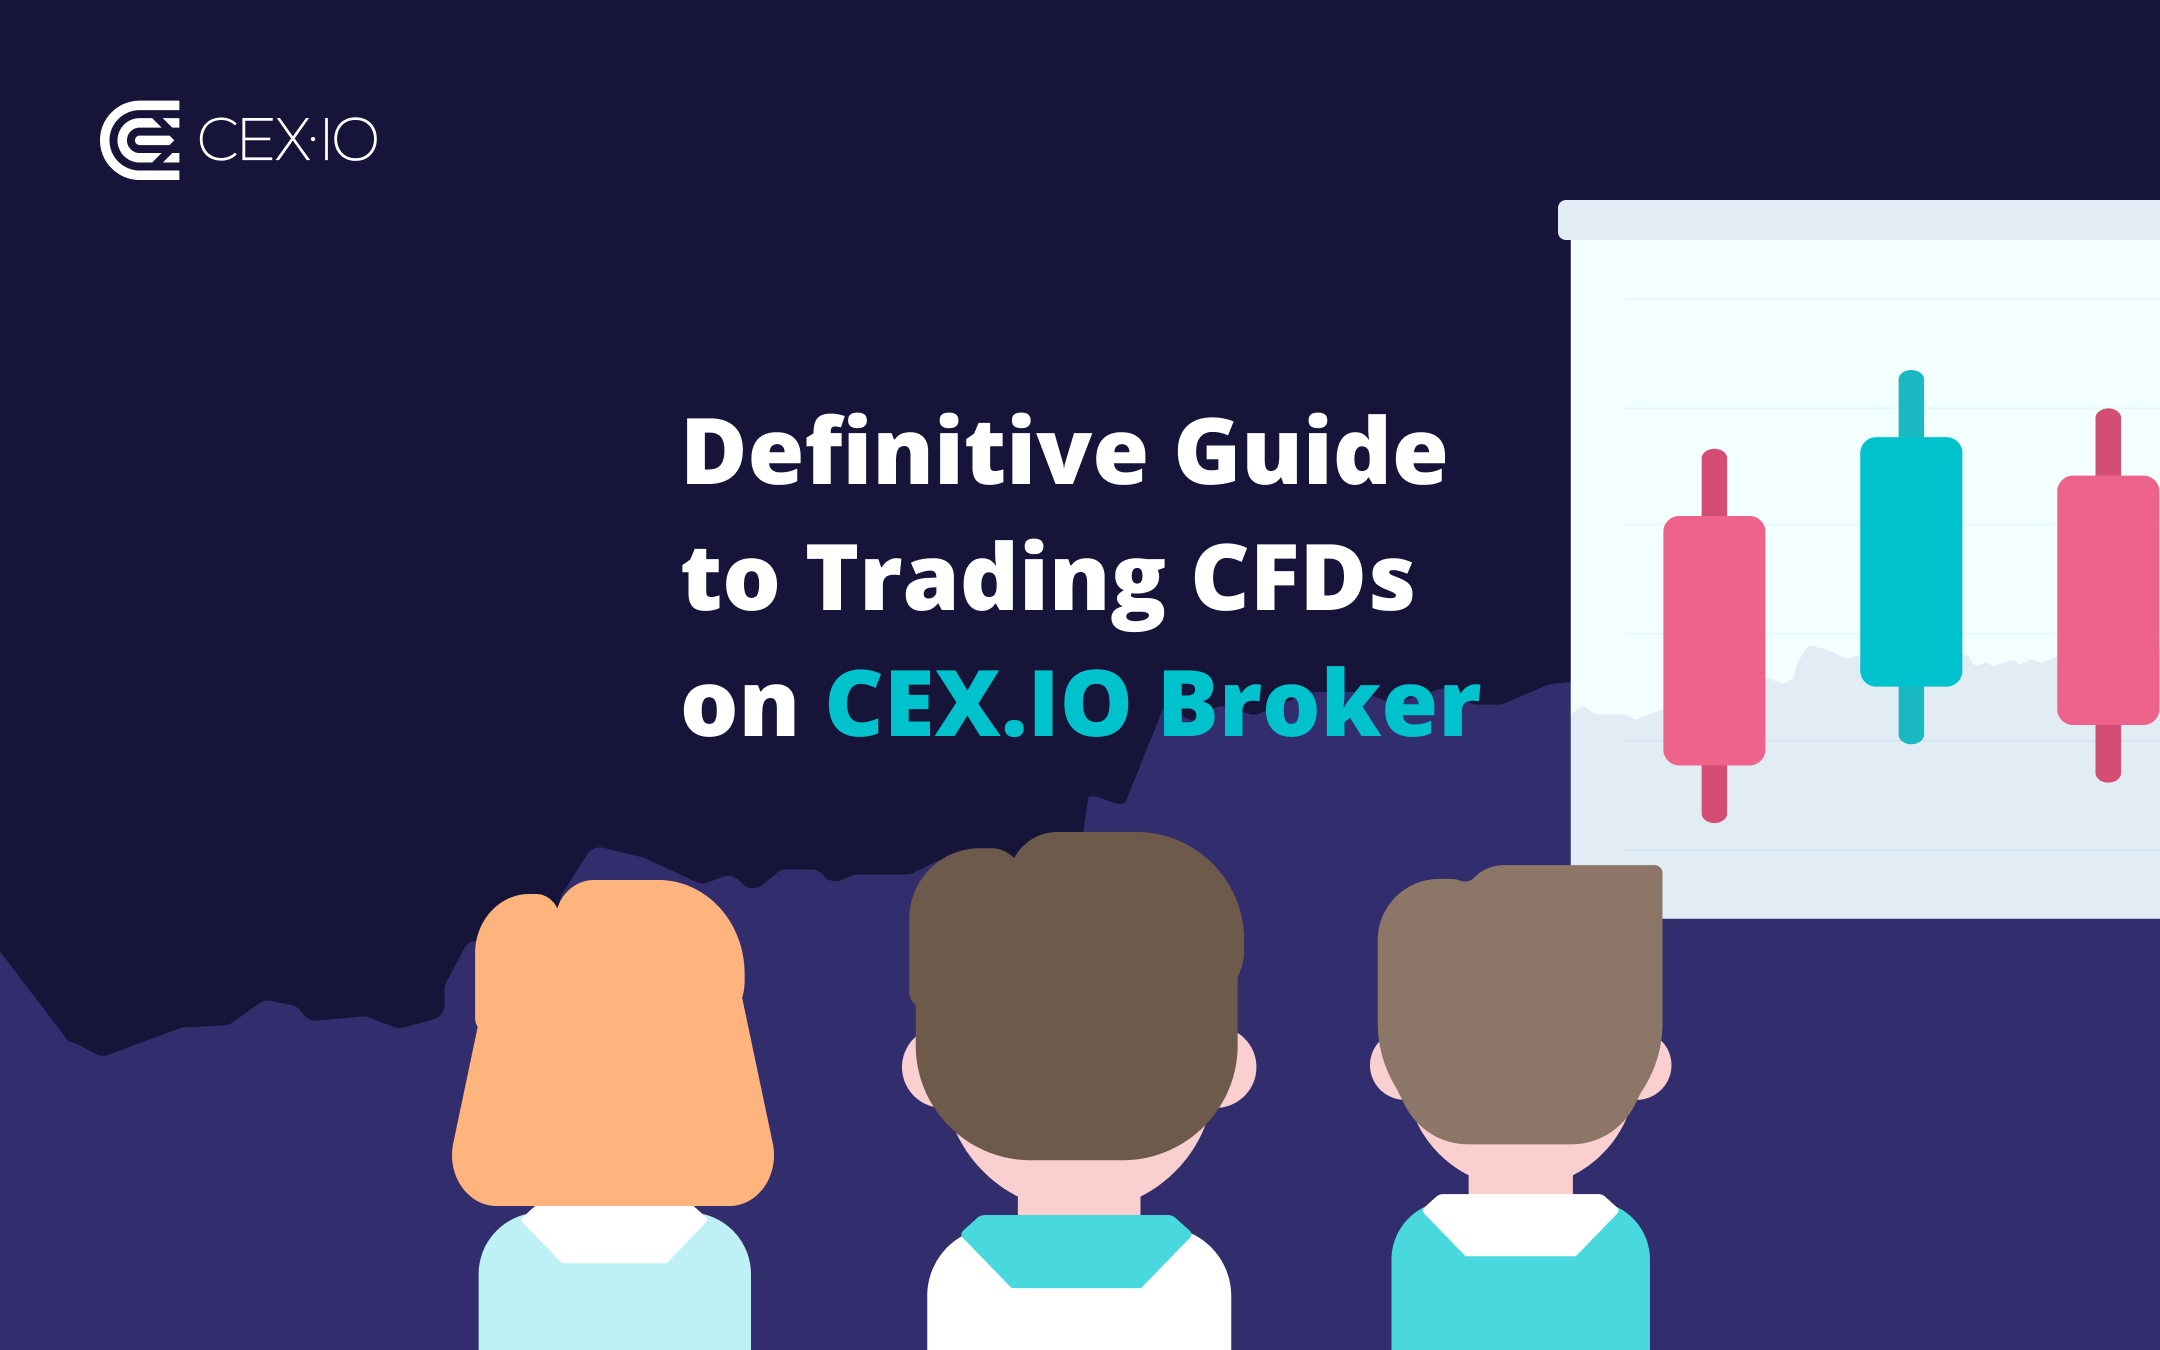 Guide to Trading CFDs